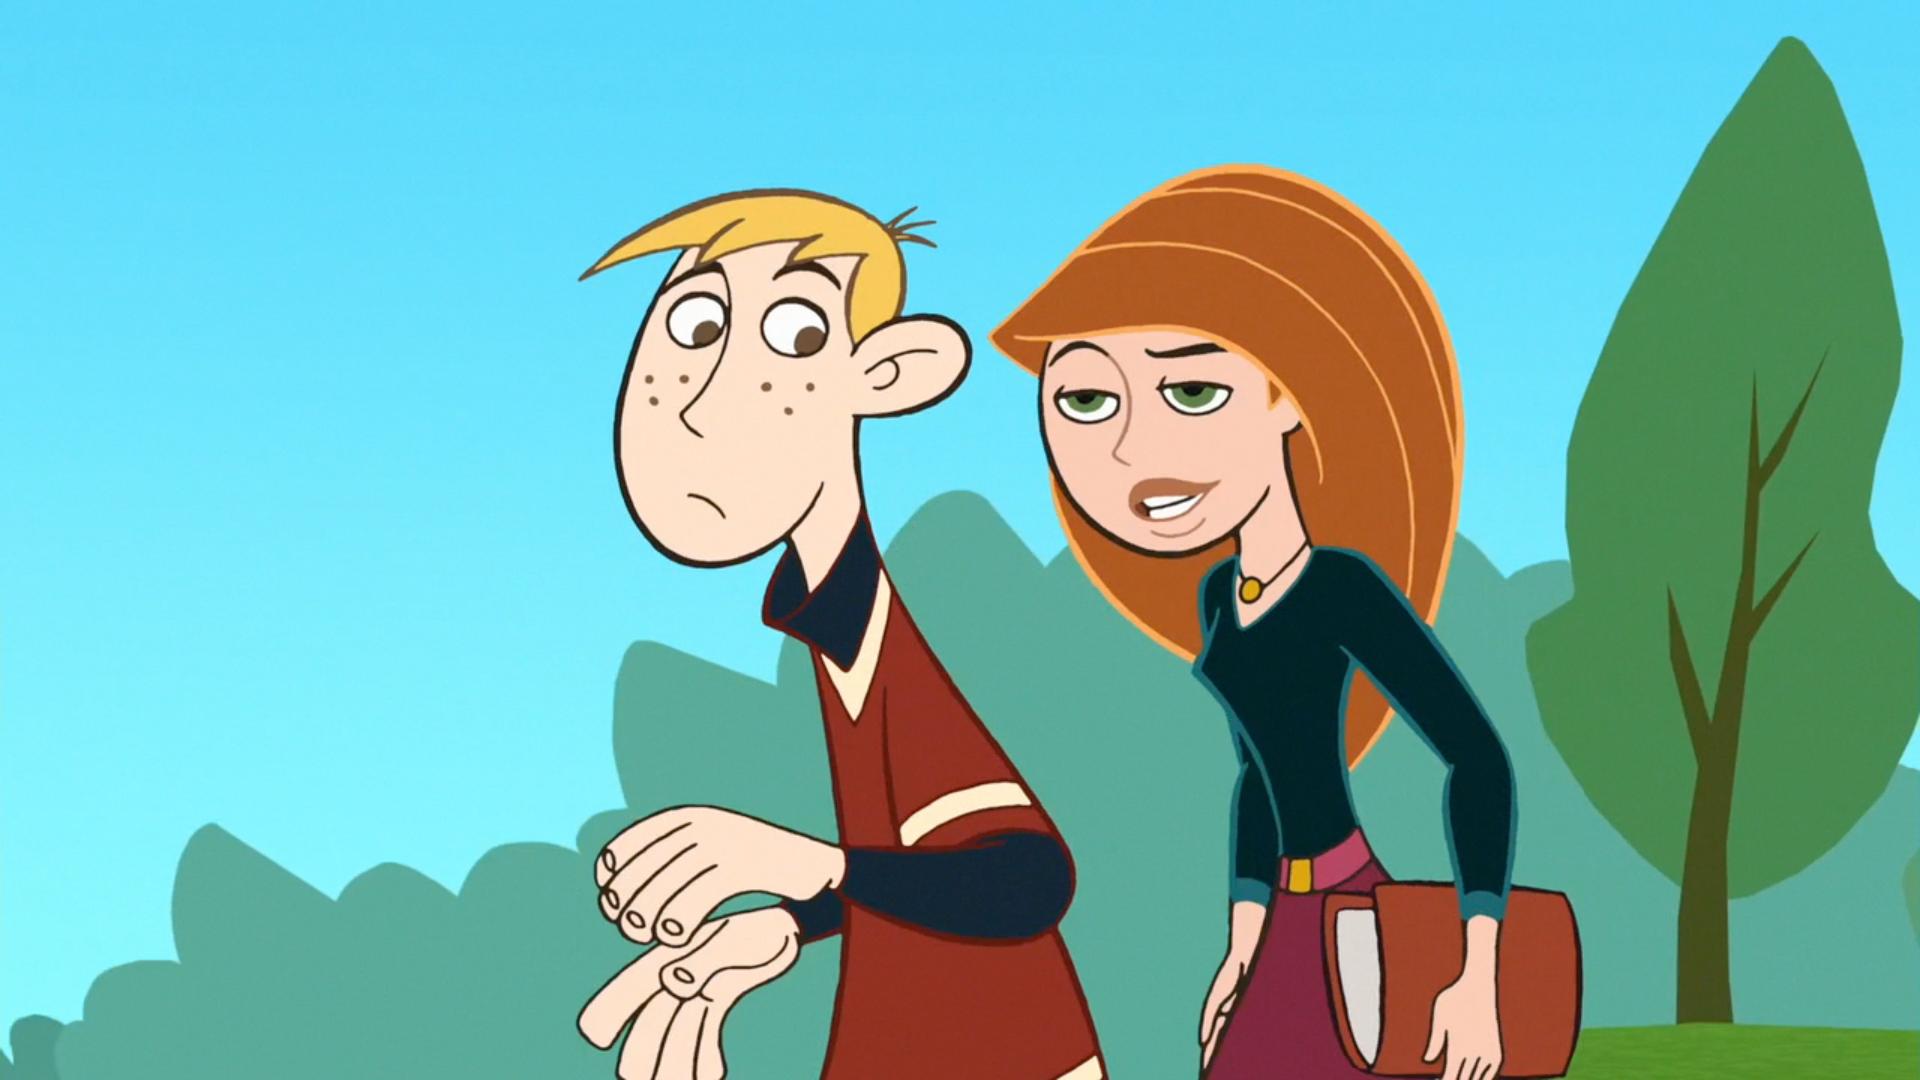 A Sitch in Time: Present (1) Screen Captures .:::. Kim Possible Fan World